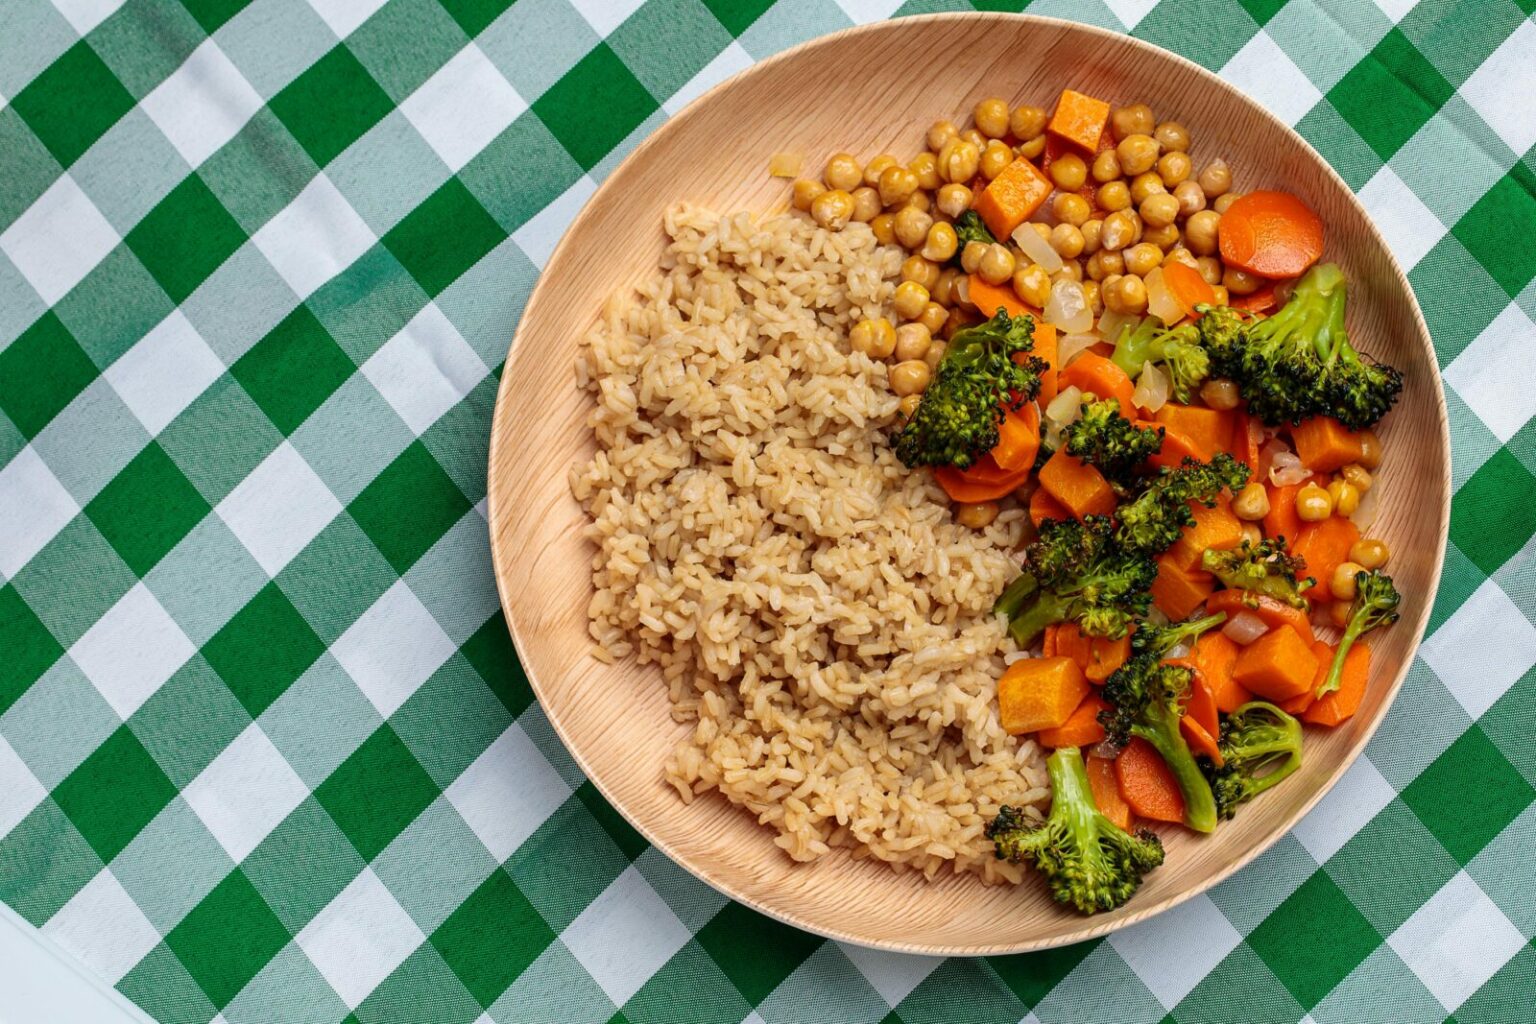 rice, vegetables, & chickpeas on a plate